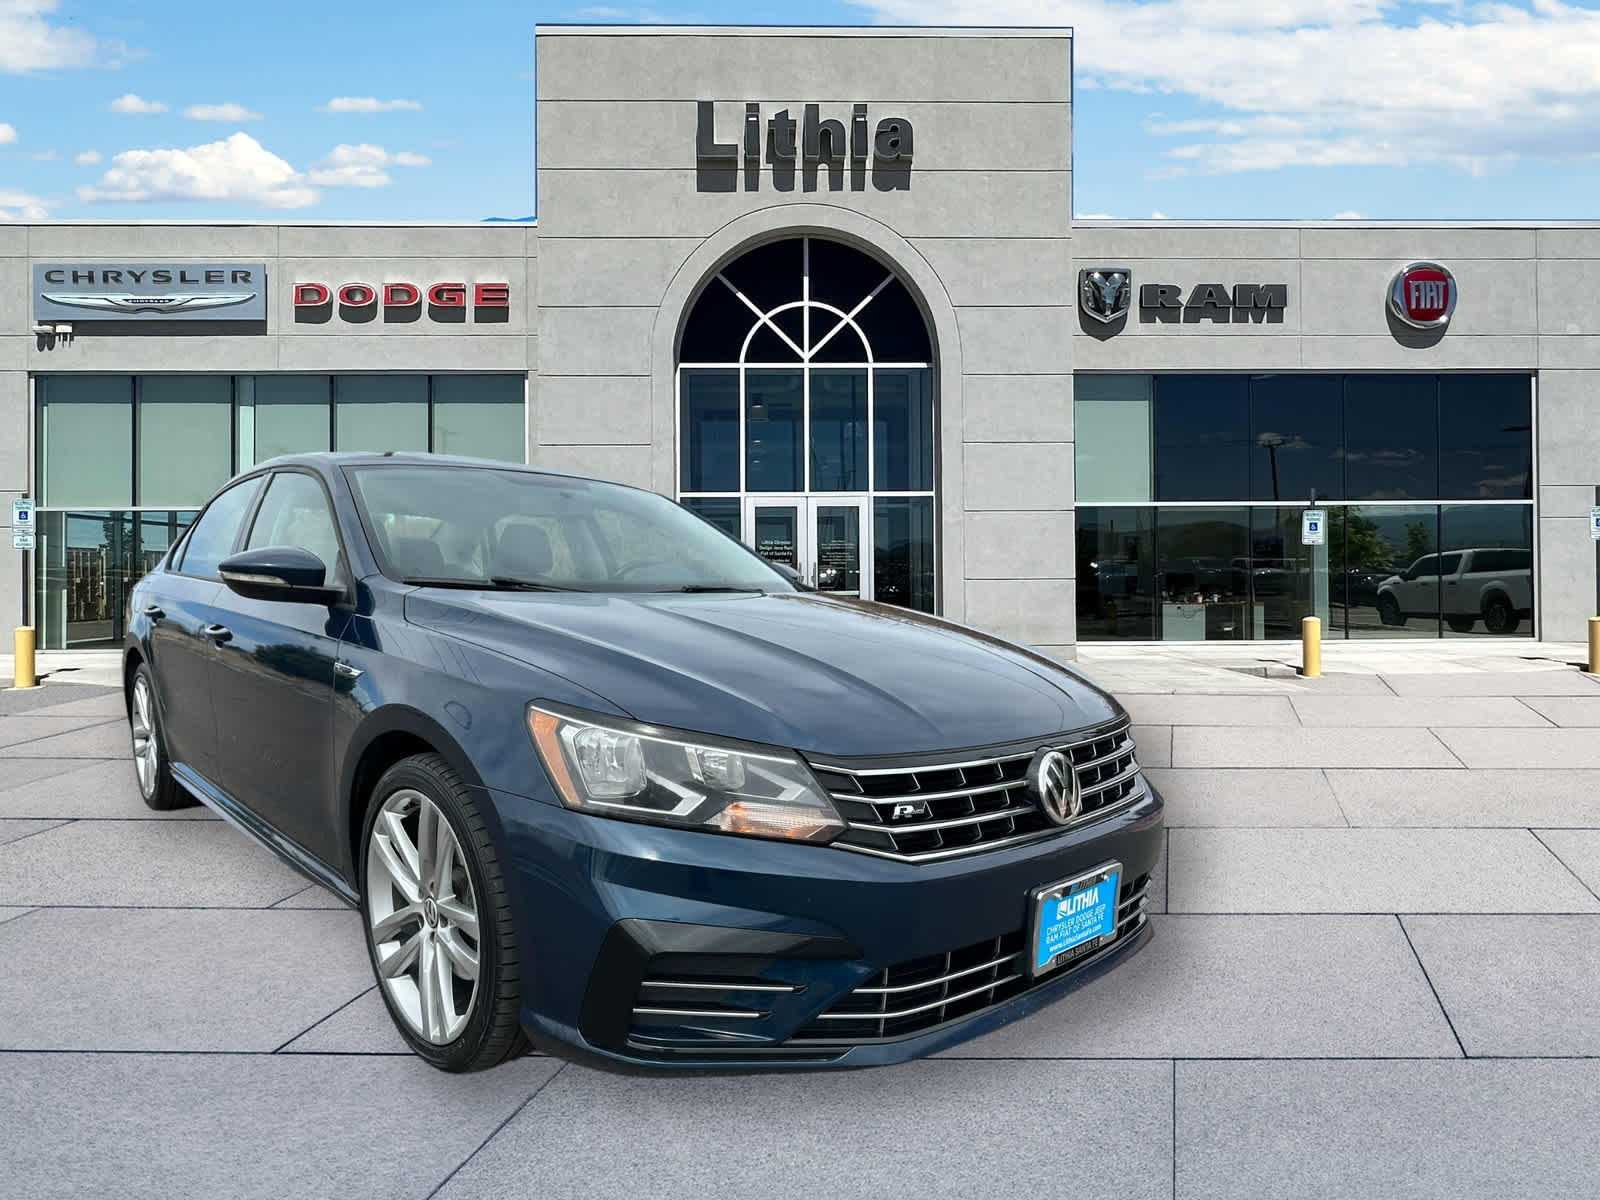 Used 2018 Volkswagen Passat R-Line with VIN 1VWAA7A32JC008715 for sale in Santa Fe, NM